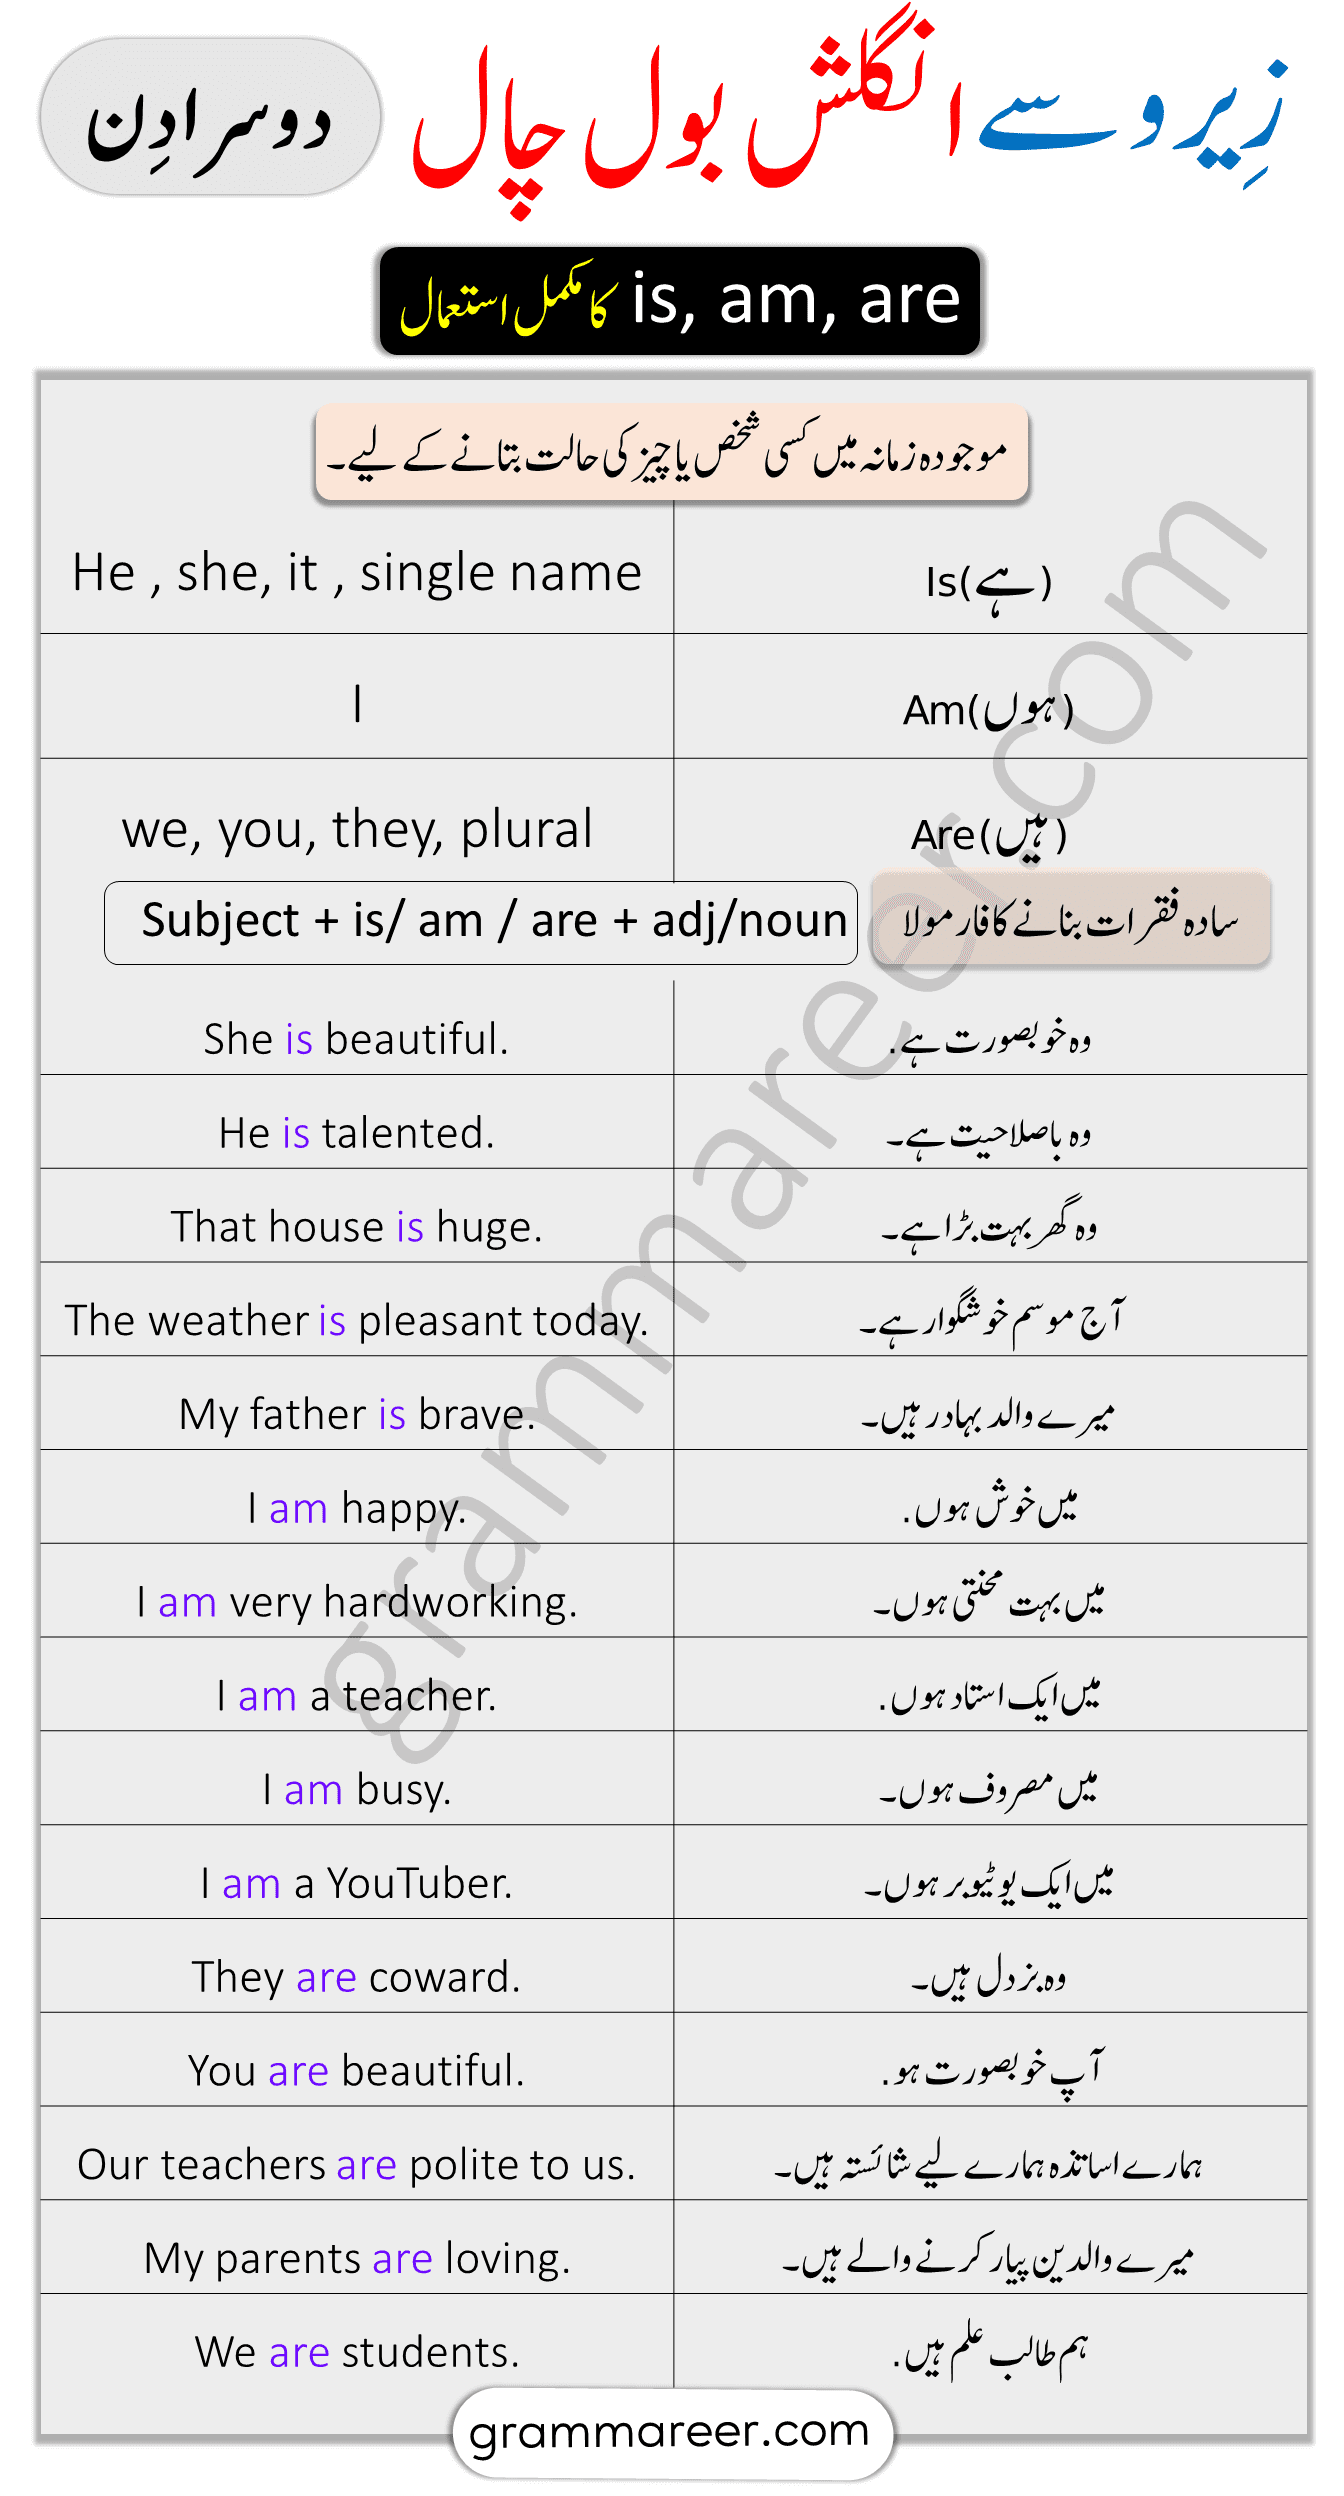 Use of is am are in English - Spoken English Course through Urdu day 2